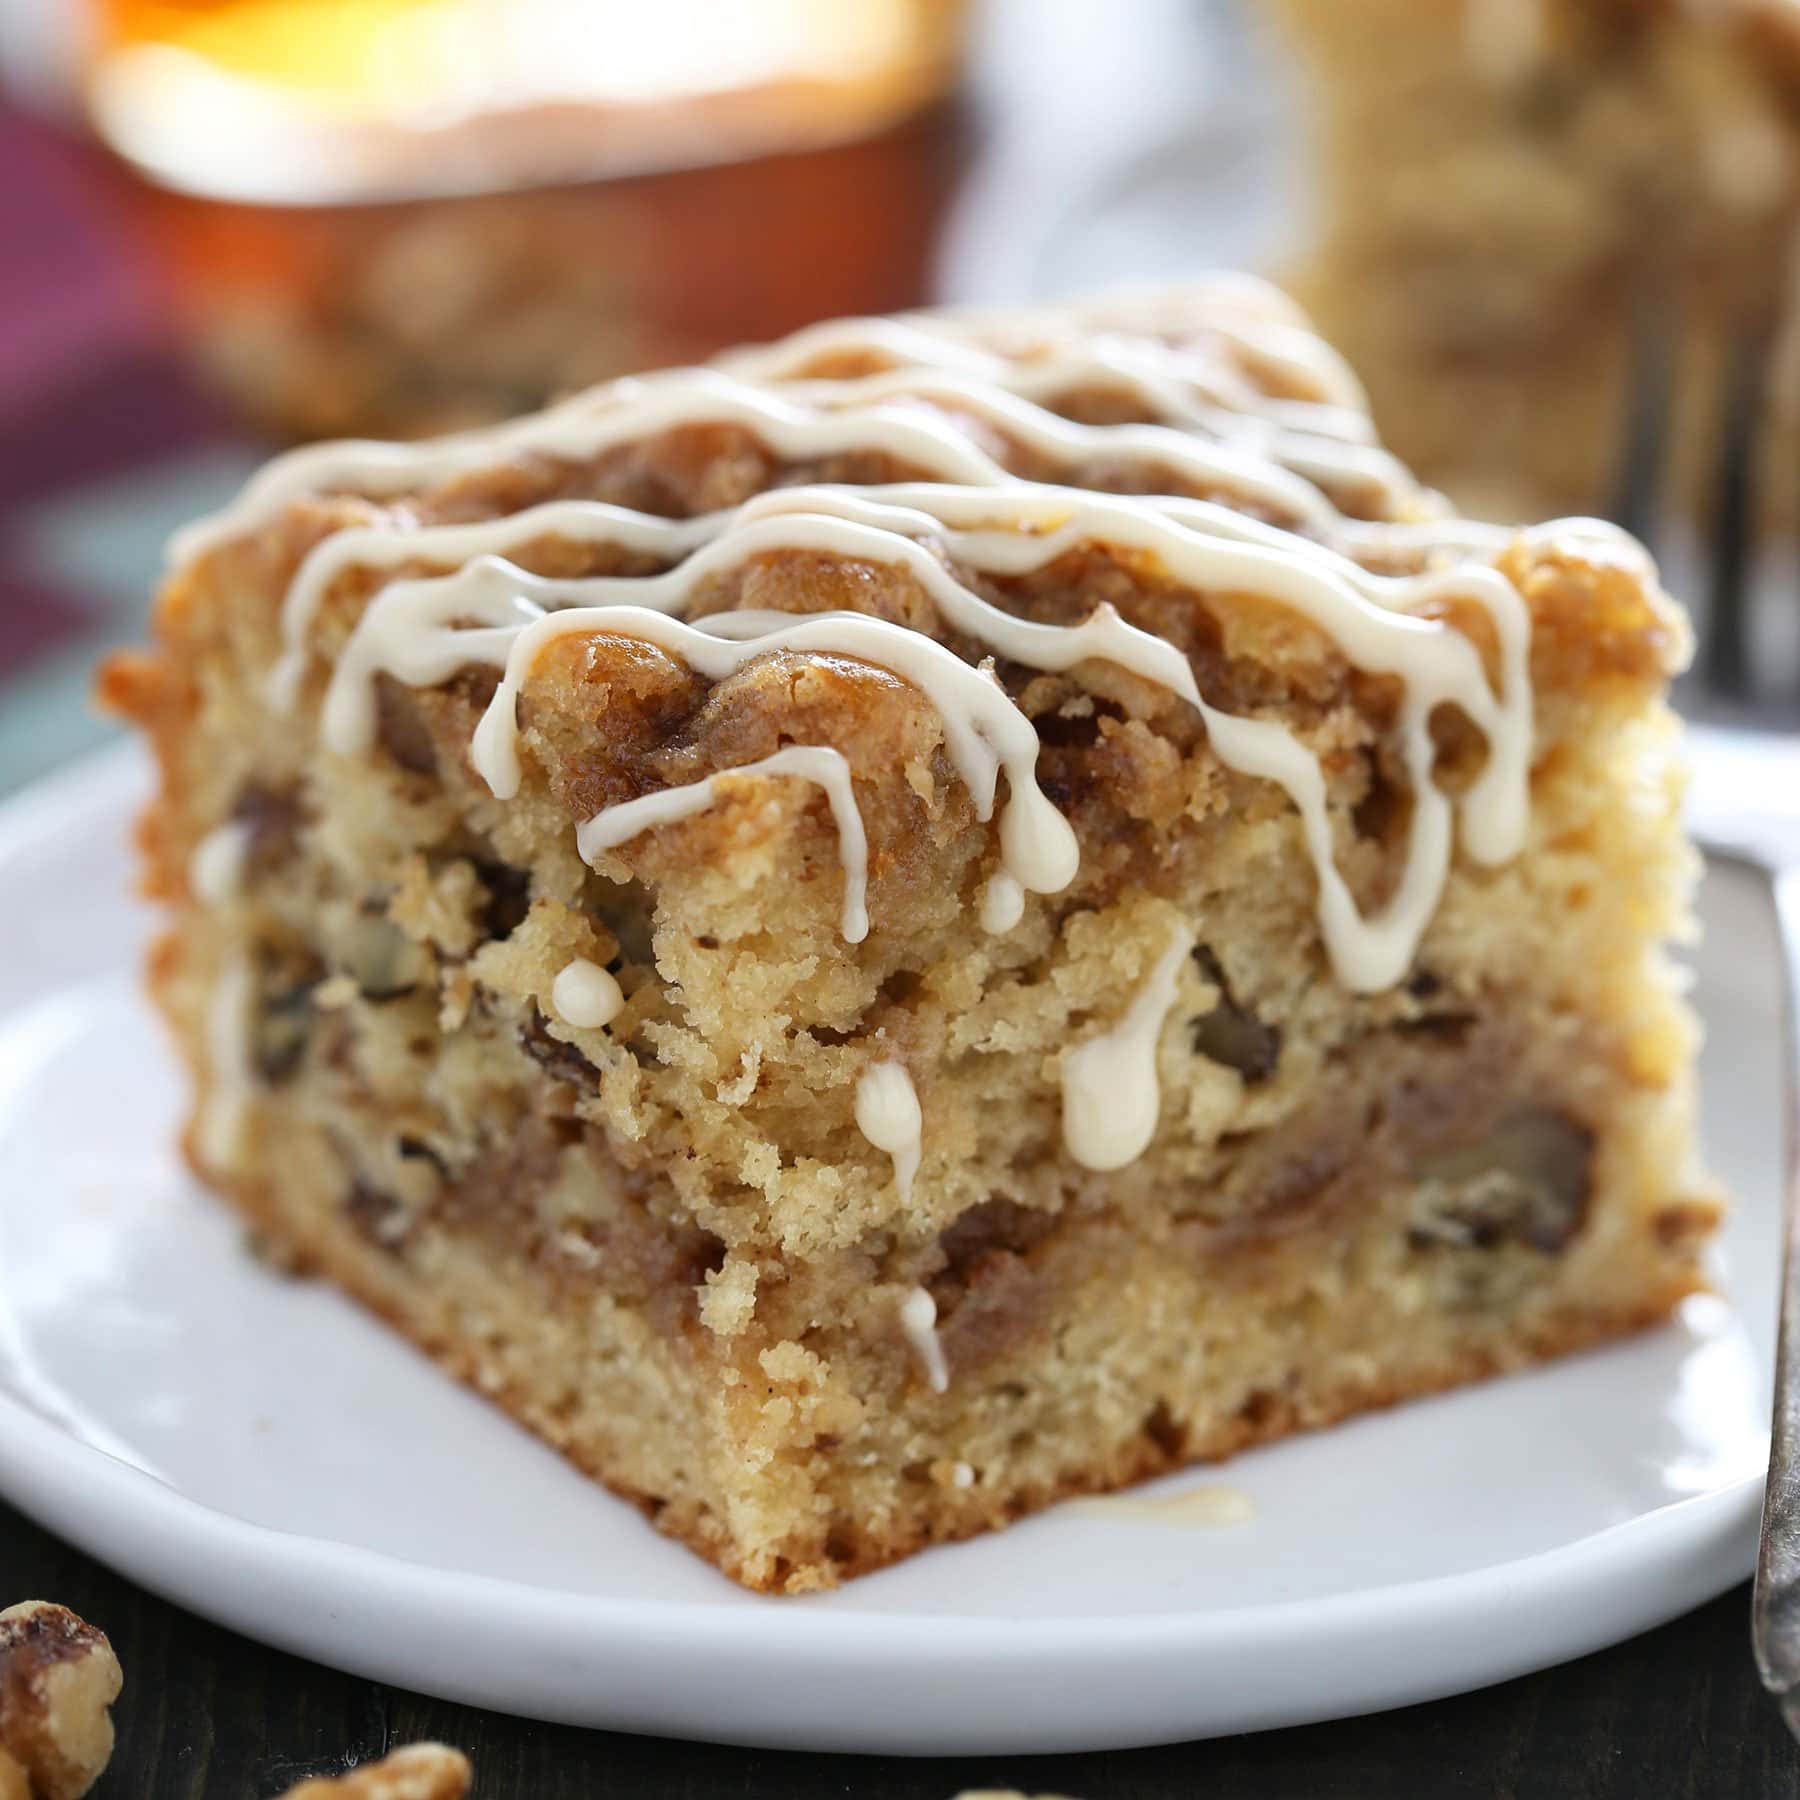 Maple Walnut Coffee Cake is perfectly moist, light, and fluffy while bursting with fall-inspired flavors. Quick and easy recipe, no mixer required!